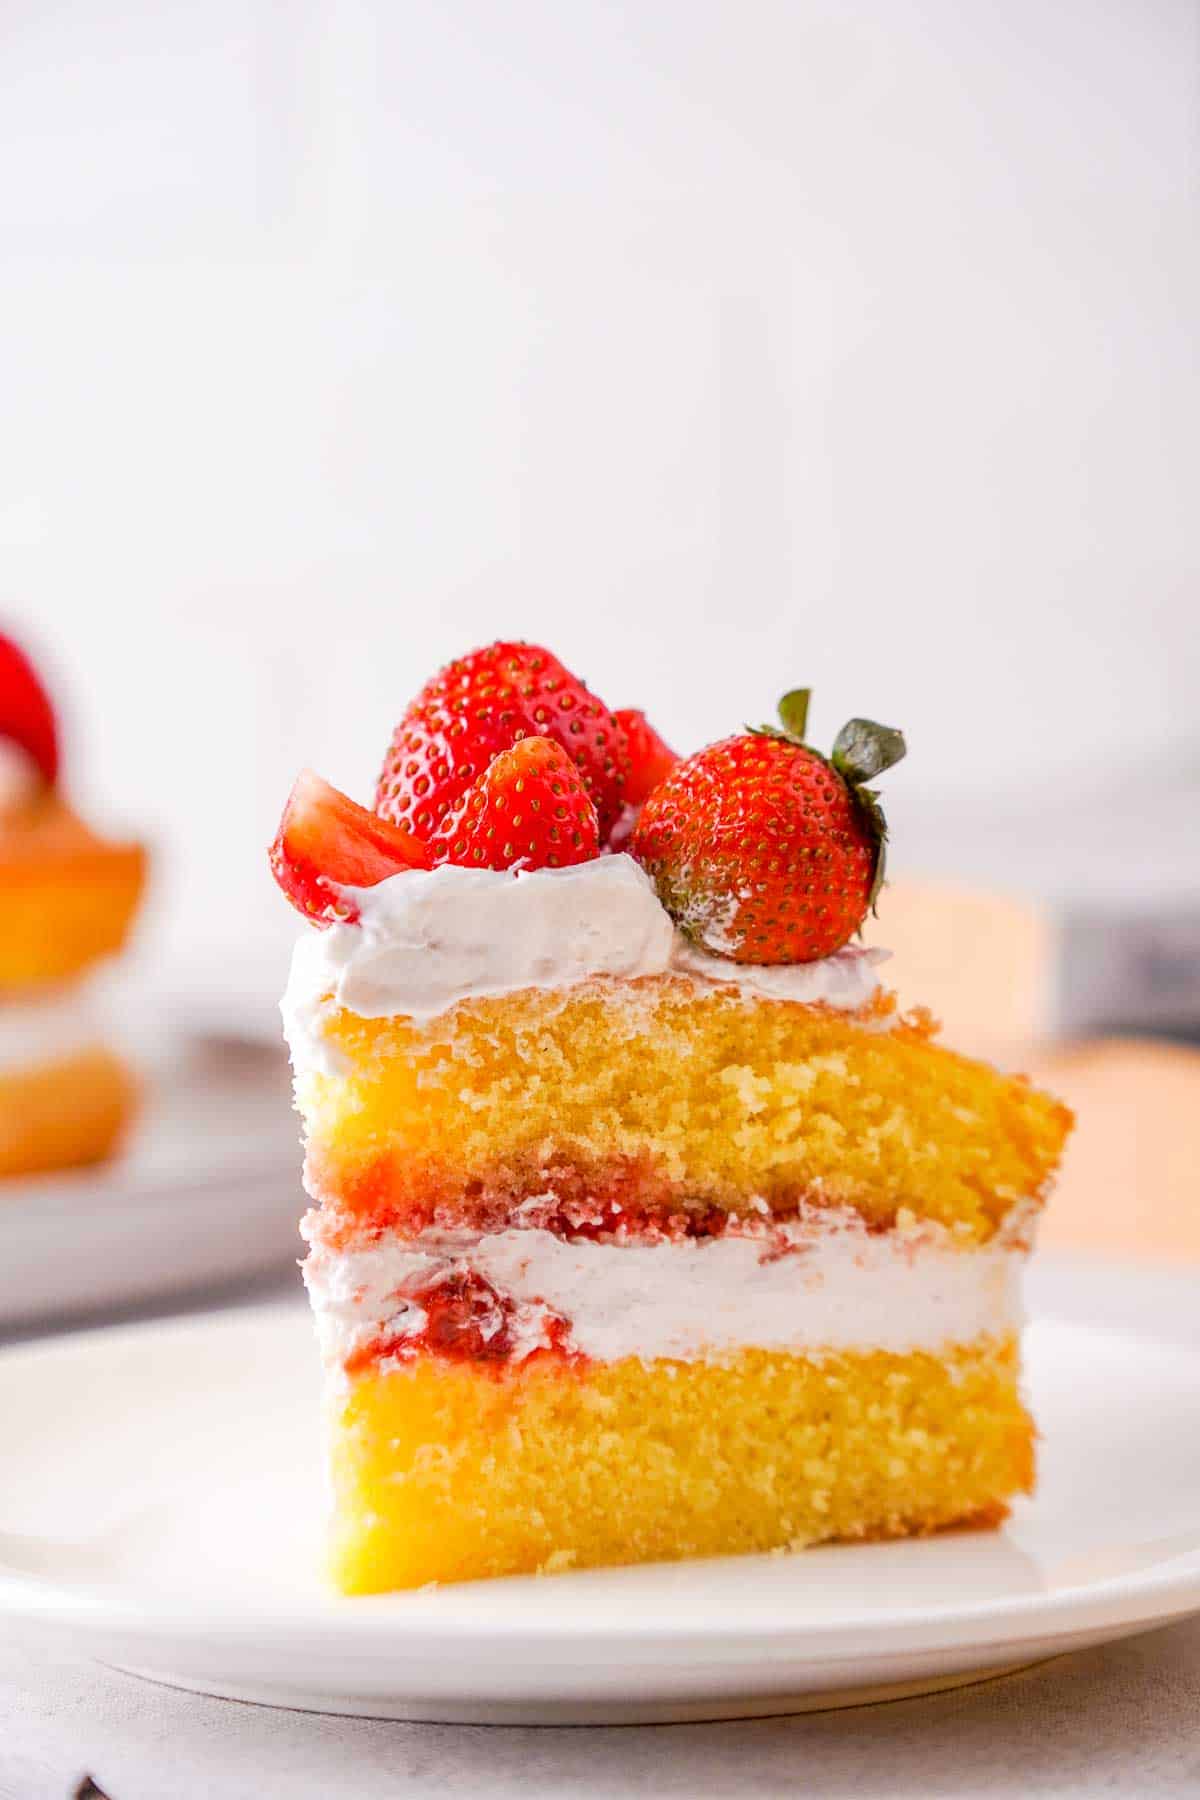 A photo showing the layers of a Victoria Sandwich slice. The strawberry jam, whipped cream, and fresh strawberries are all clearly visible.